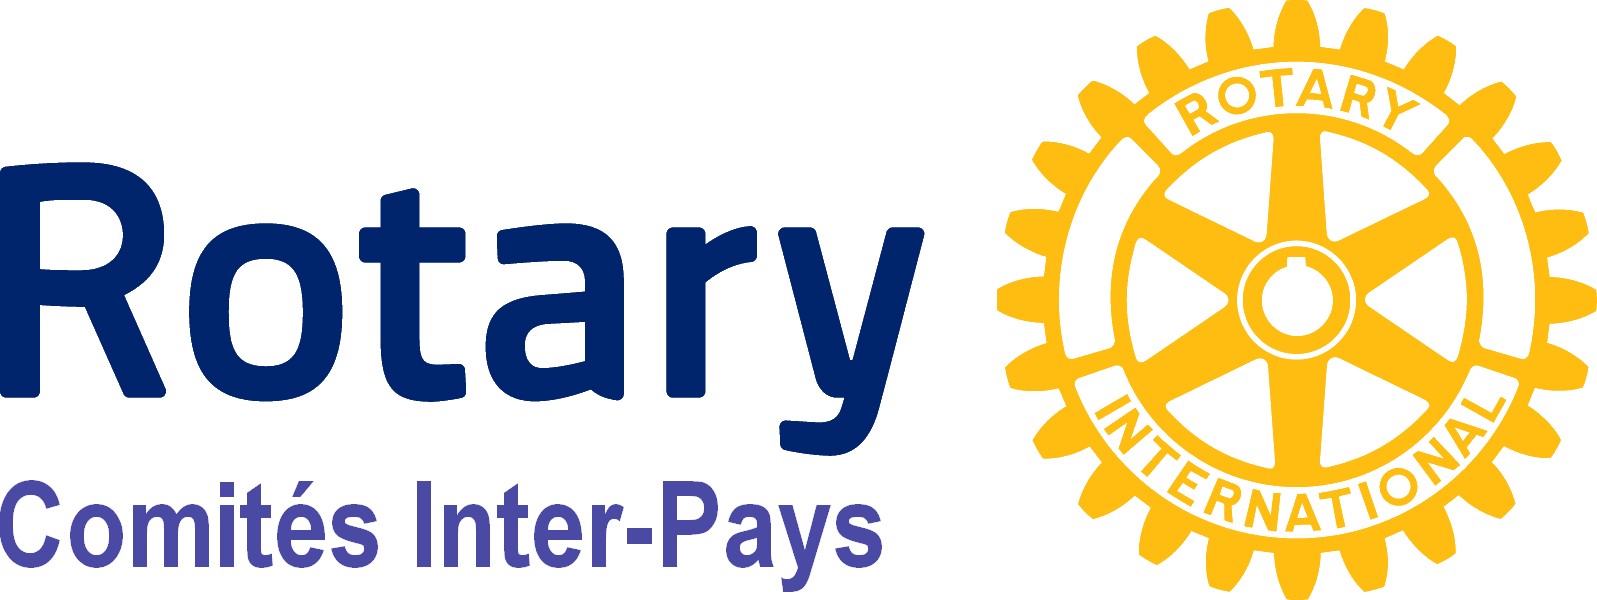 Coordination Rotary des Comités Inter-Pays - France